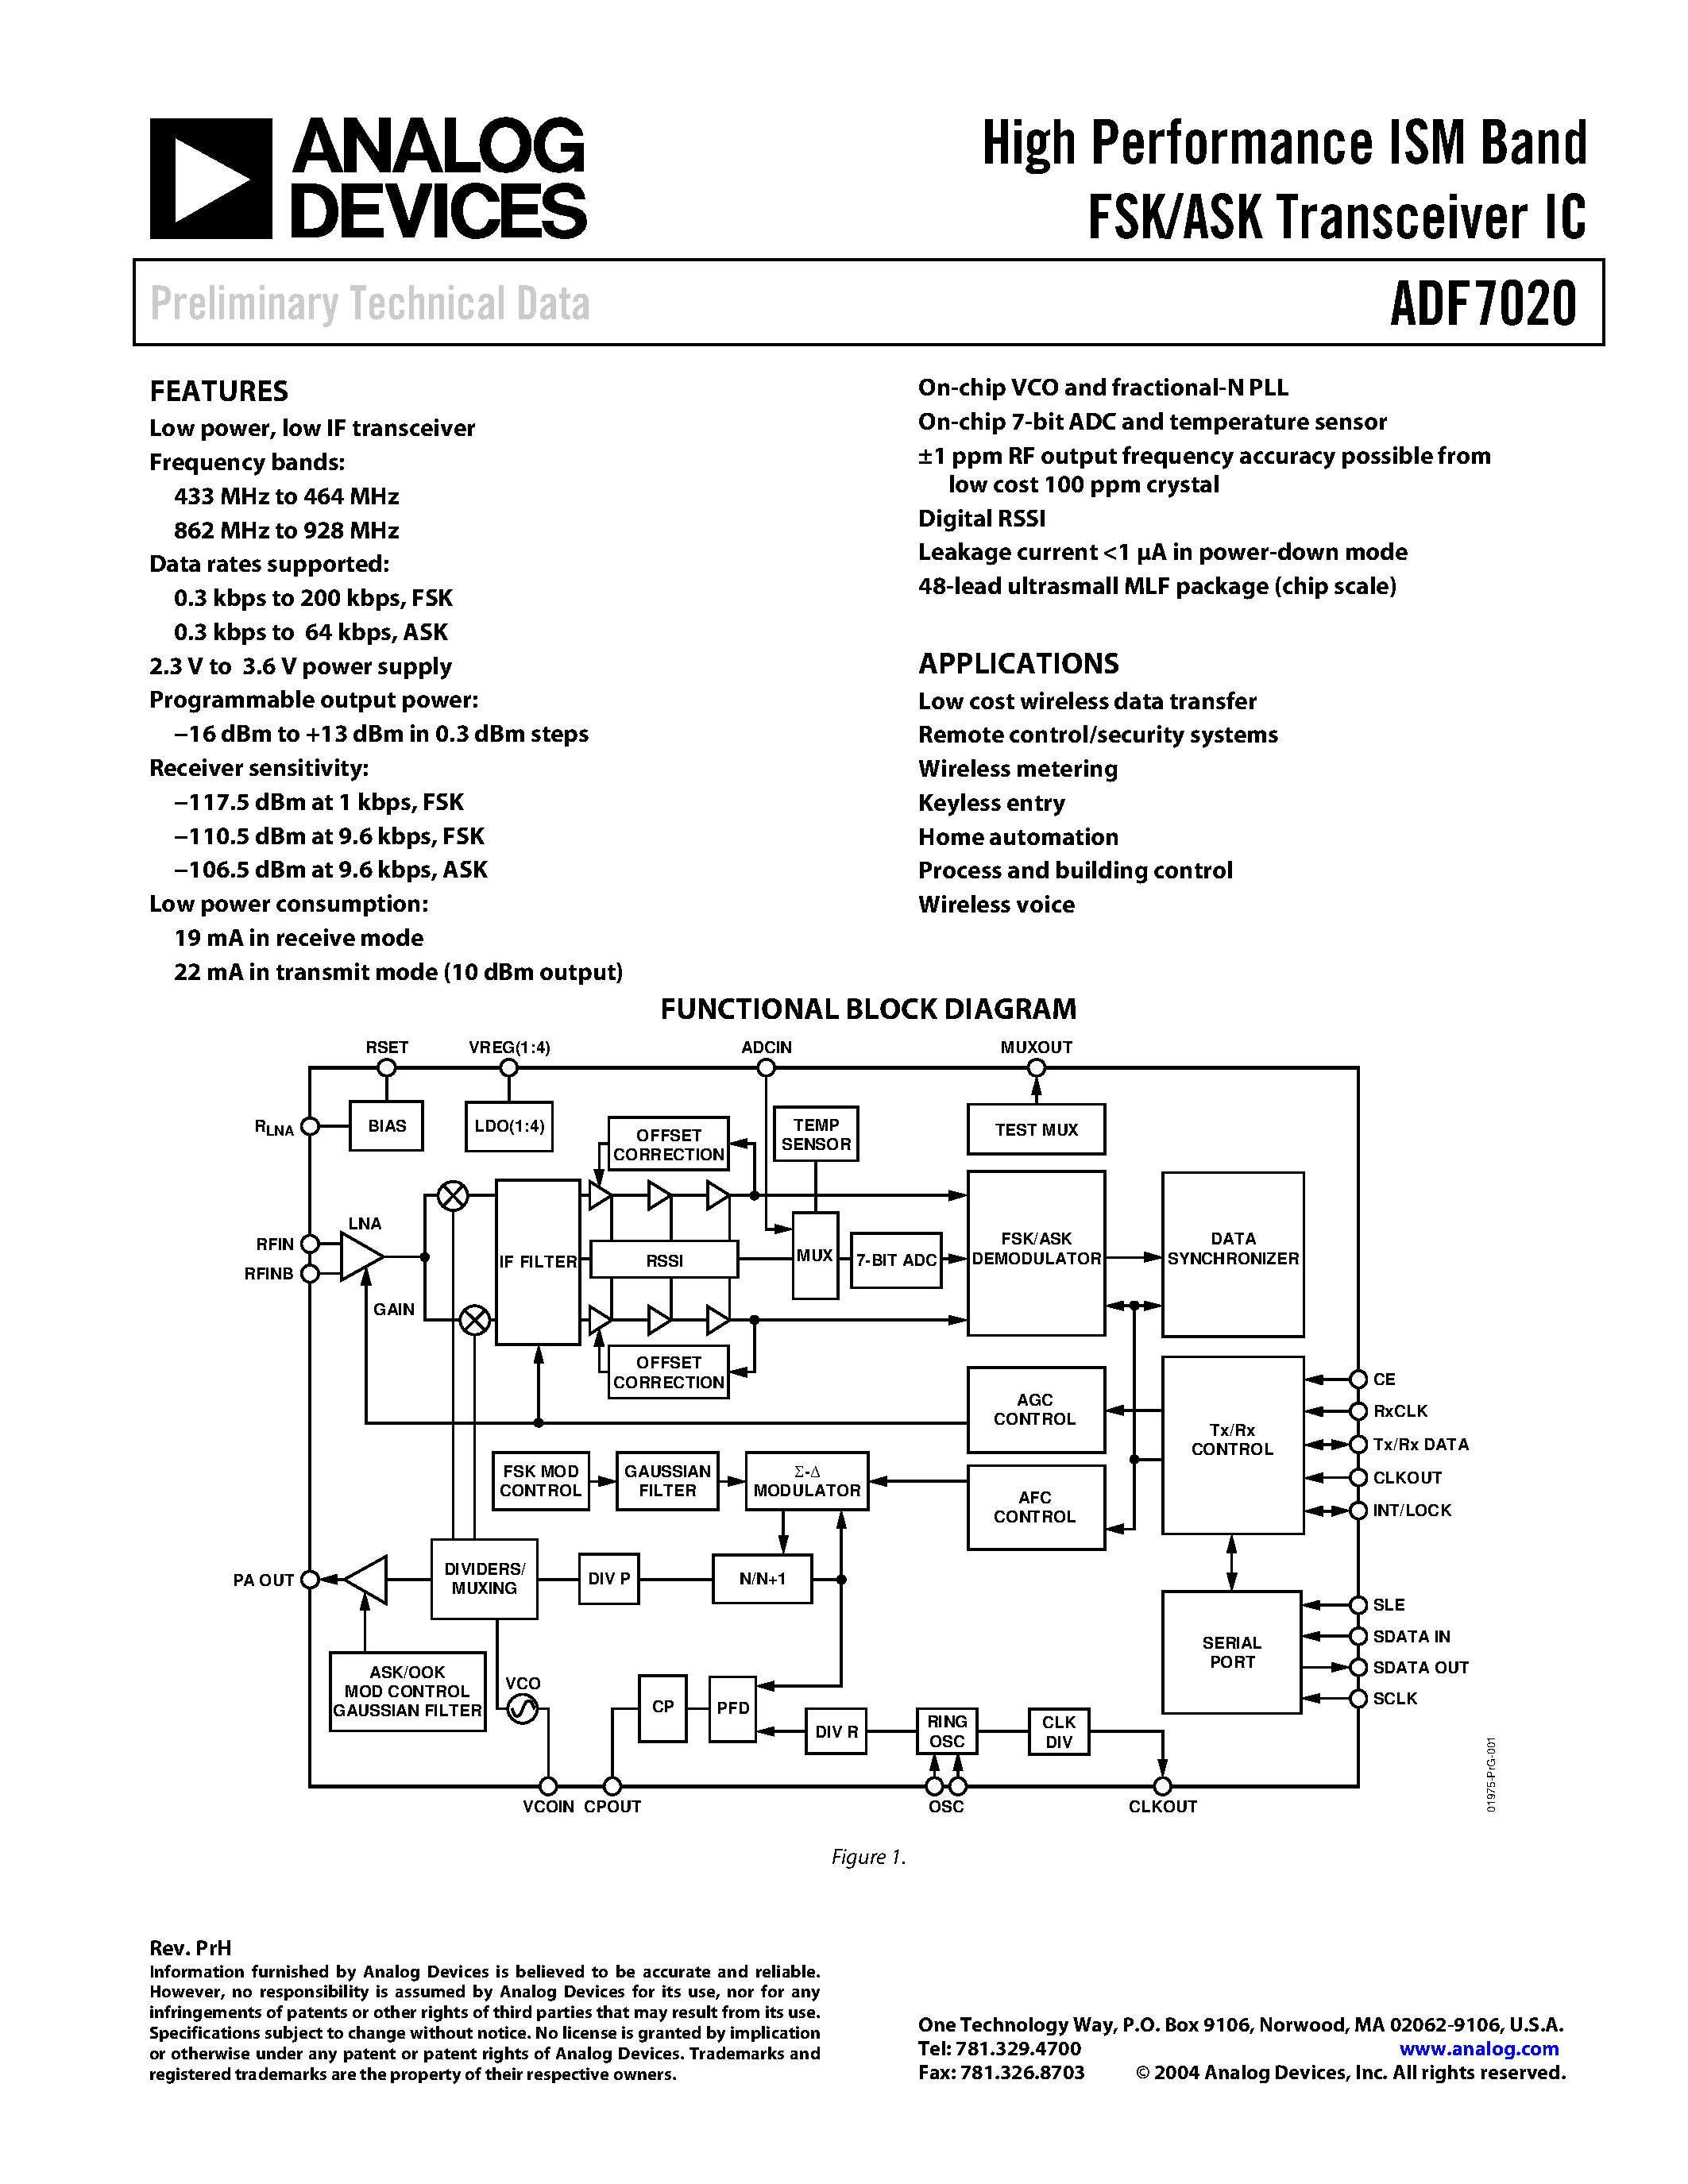 Даташит ADF7020BCP - High Performance ISM Band FSK/ASK Transceiver IC страница 1